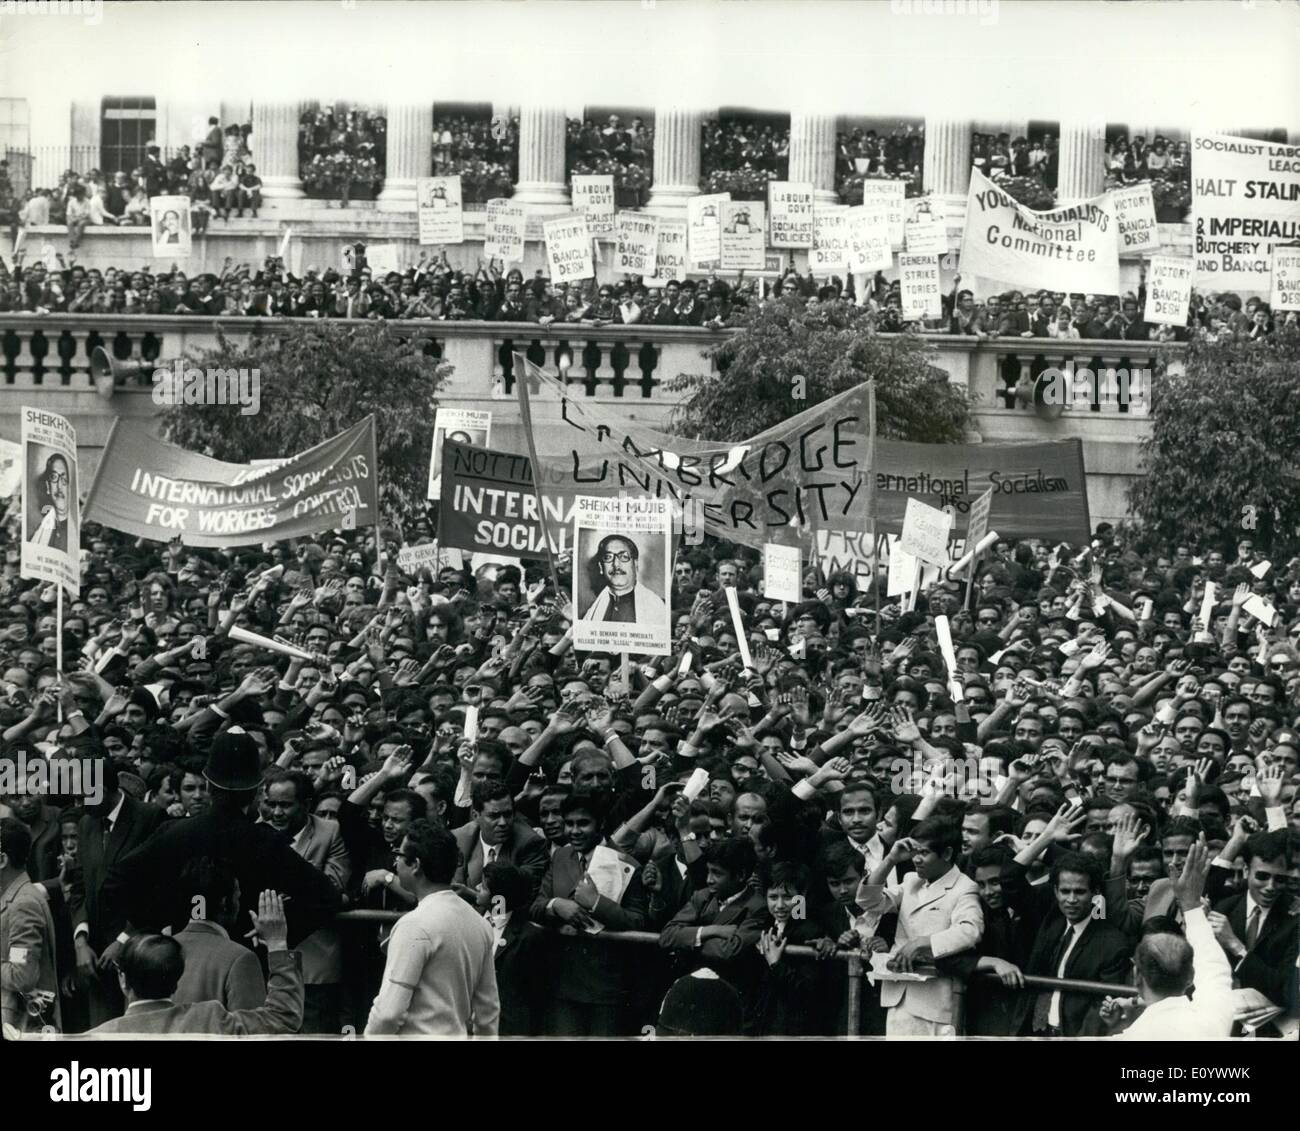 Aug. 08, 1971 - Recognise Bangladesh Rally in Trafalgar Square: A big rally was held in Trafalgar Square this afternoon by Action Bangladesh, calling to stop Genocide and Recognise Bangladesh. Photo shows a general view of the big crowd taking part in the rally in Trafalgar Square today. Stock Photo